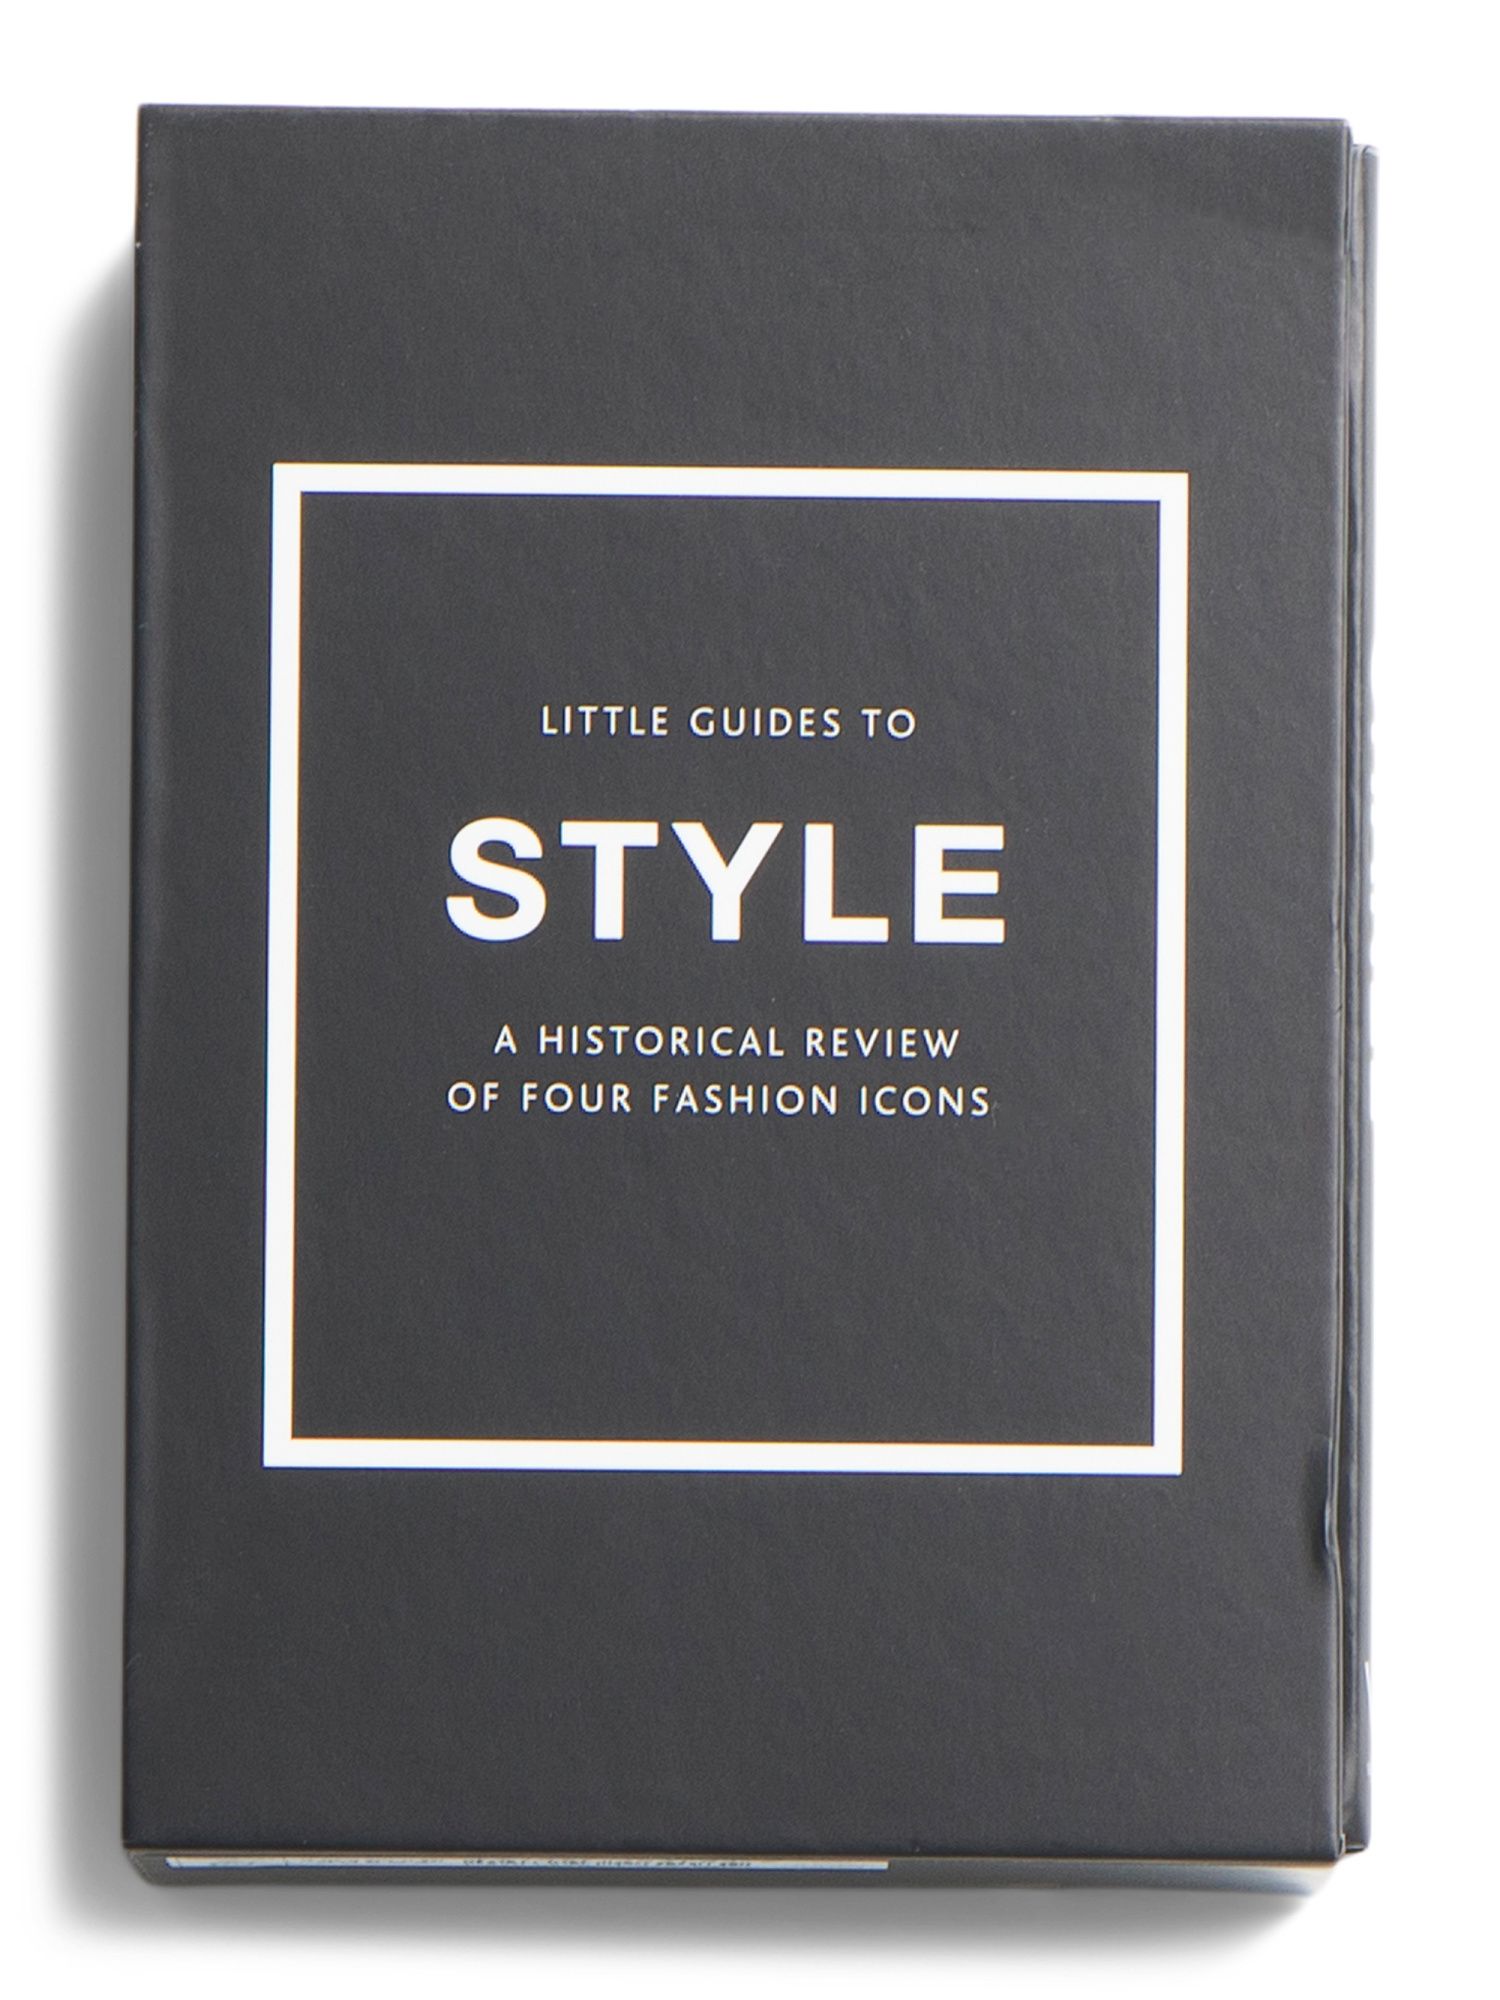 Little Guides To Style 4 Book Boxed Set | TJ Maxx